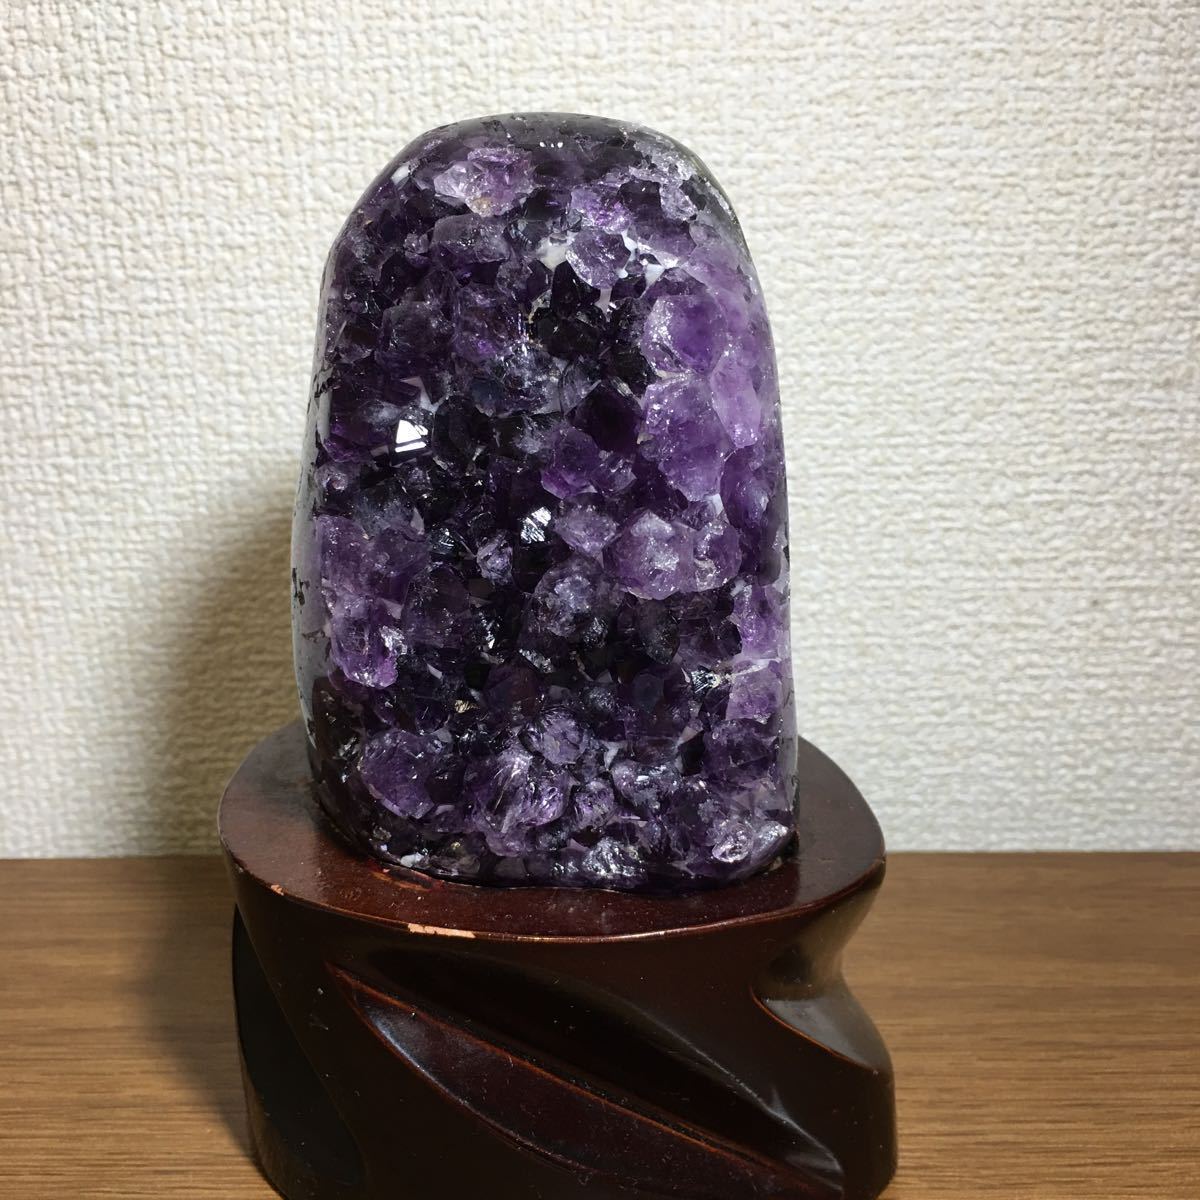 Super large highest quality amethyst dome cluster Calkspur symbiotic rare item pedestal included cheap shipping, handmade works, interior, miscellaneous goods, ornament, object